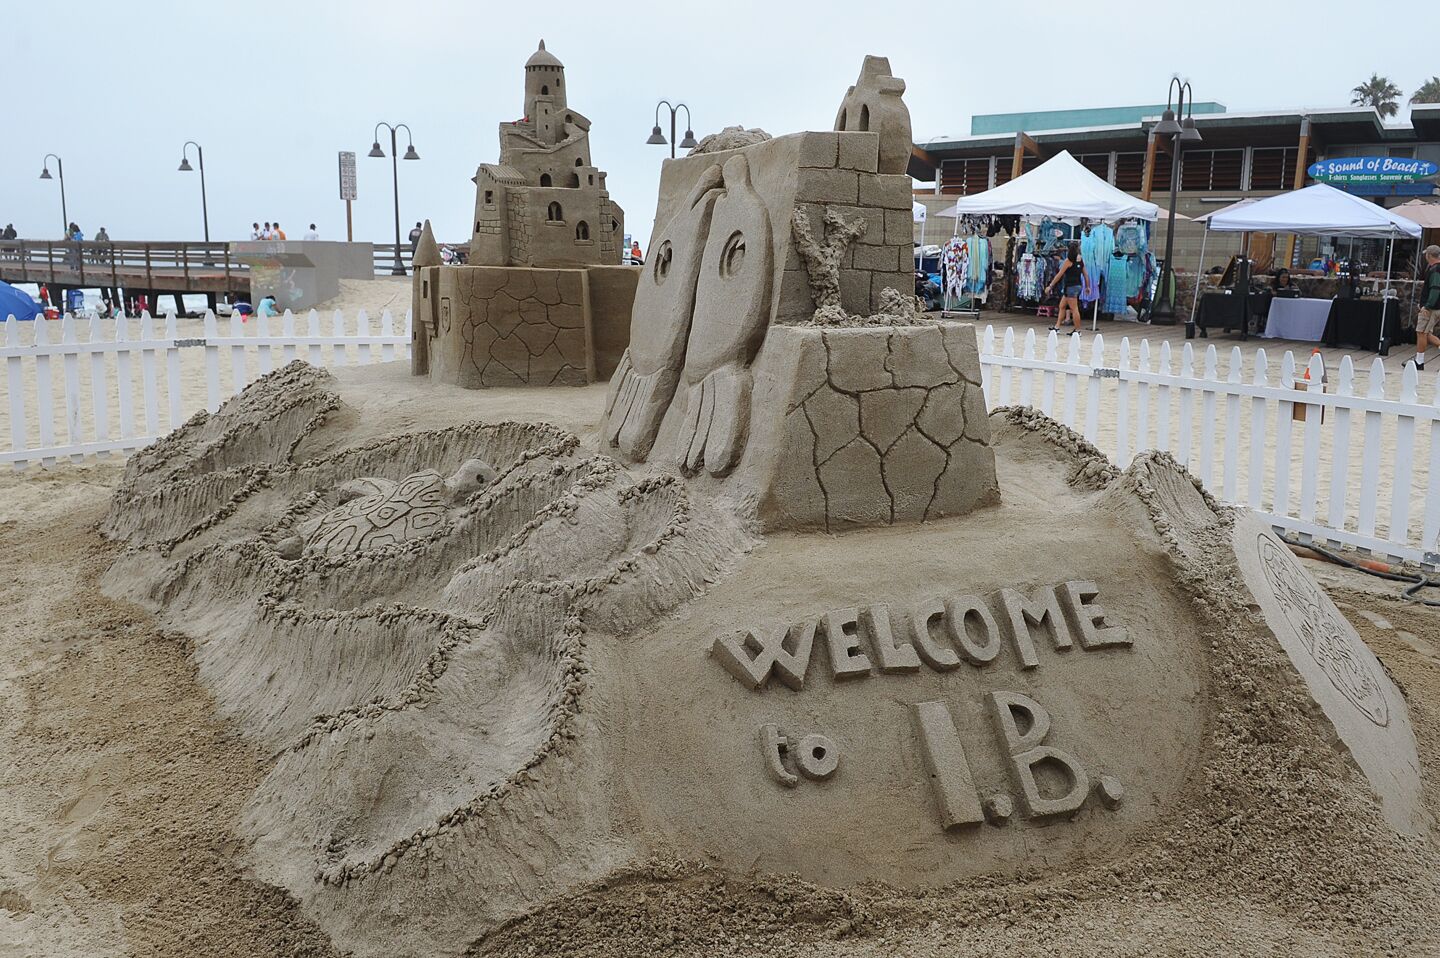 Attendees at the Sun and Sea Festival enjoyed a parade, sandcastle sculptures, music, food and more in Imperial Beach on Saturday, July 13, 2019.